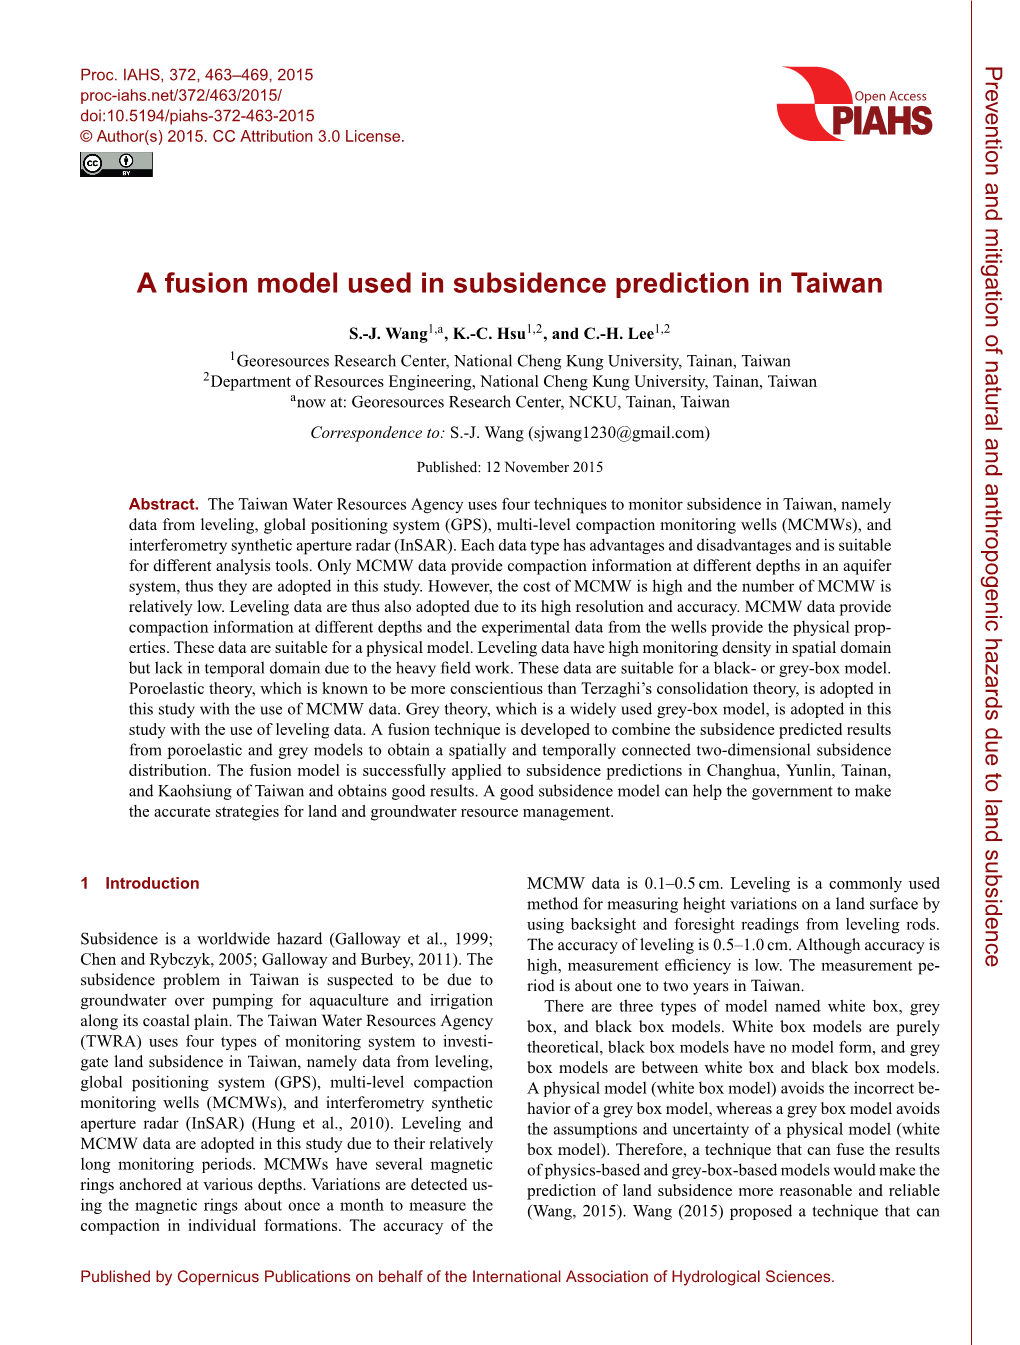 A Fusion Model Used in Subsidence Prediction in Taiwan